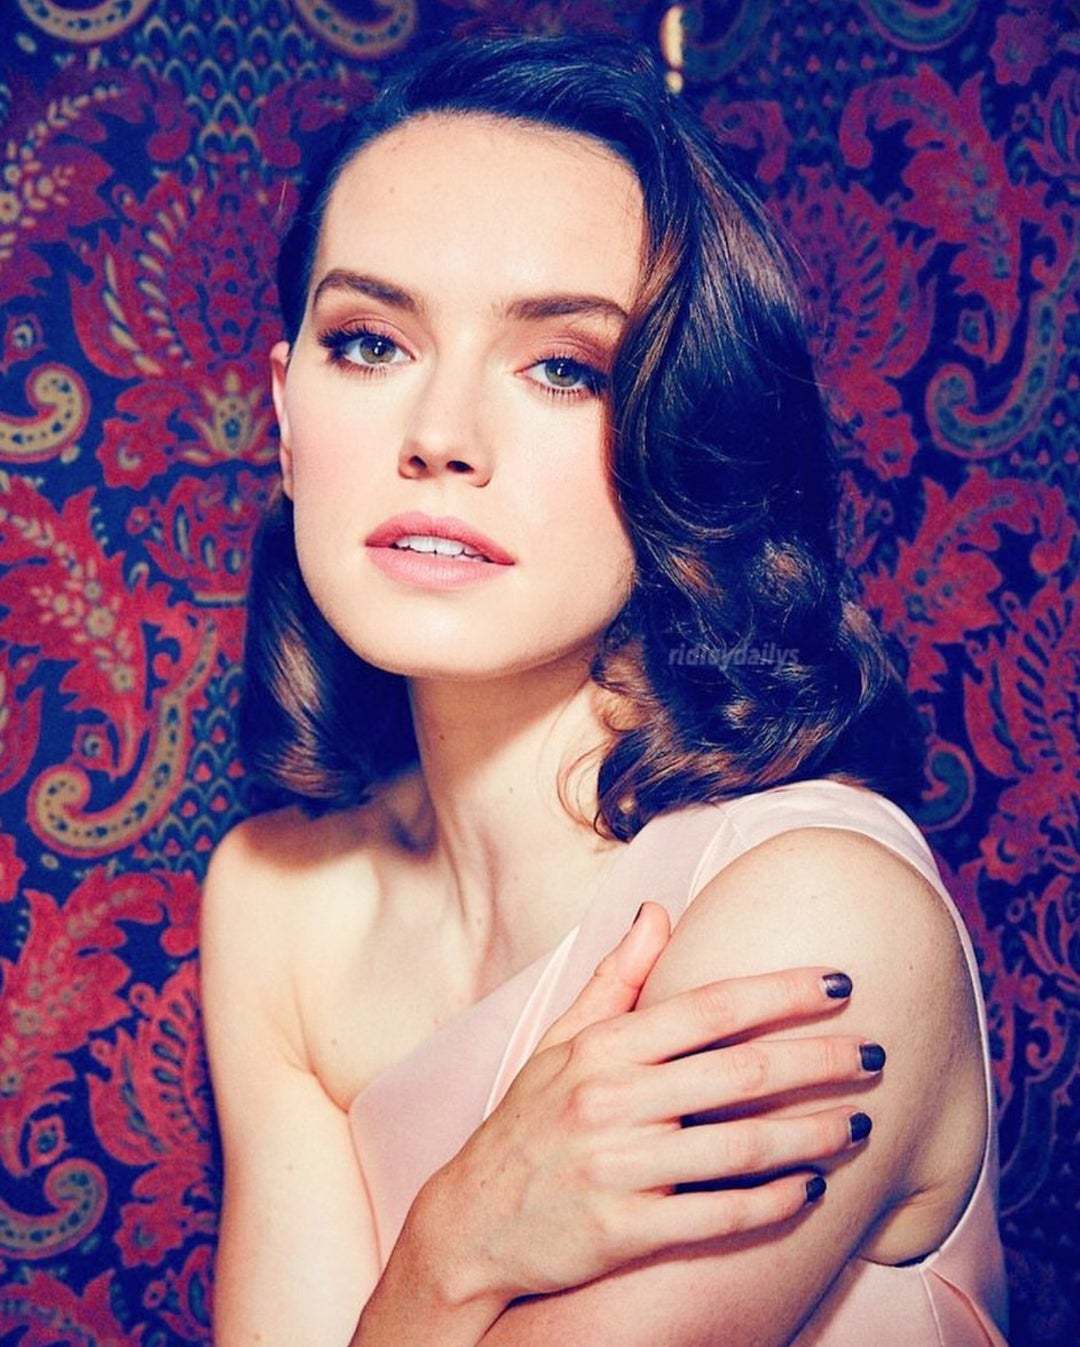 Daisy Ridley Has One Of The Most Perfect Faces There Is Let S Rub Our Cocks And Spread Pre Cum